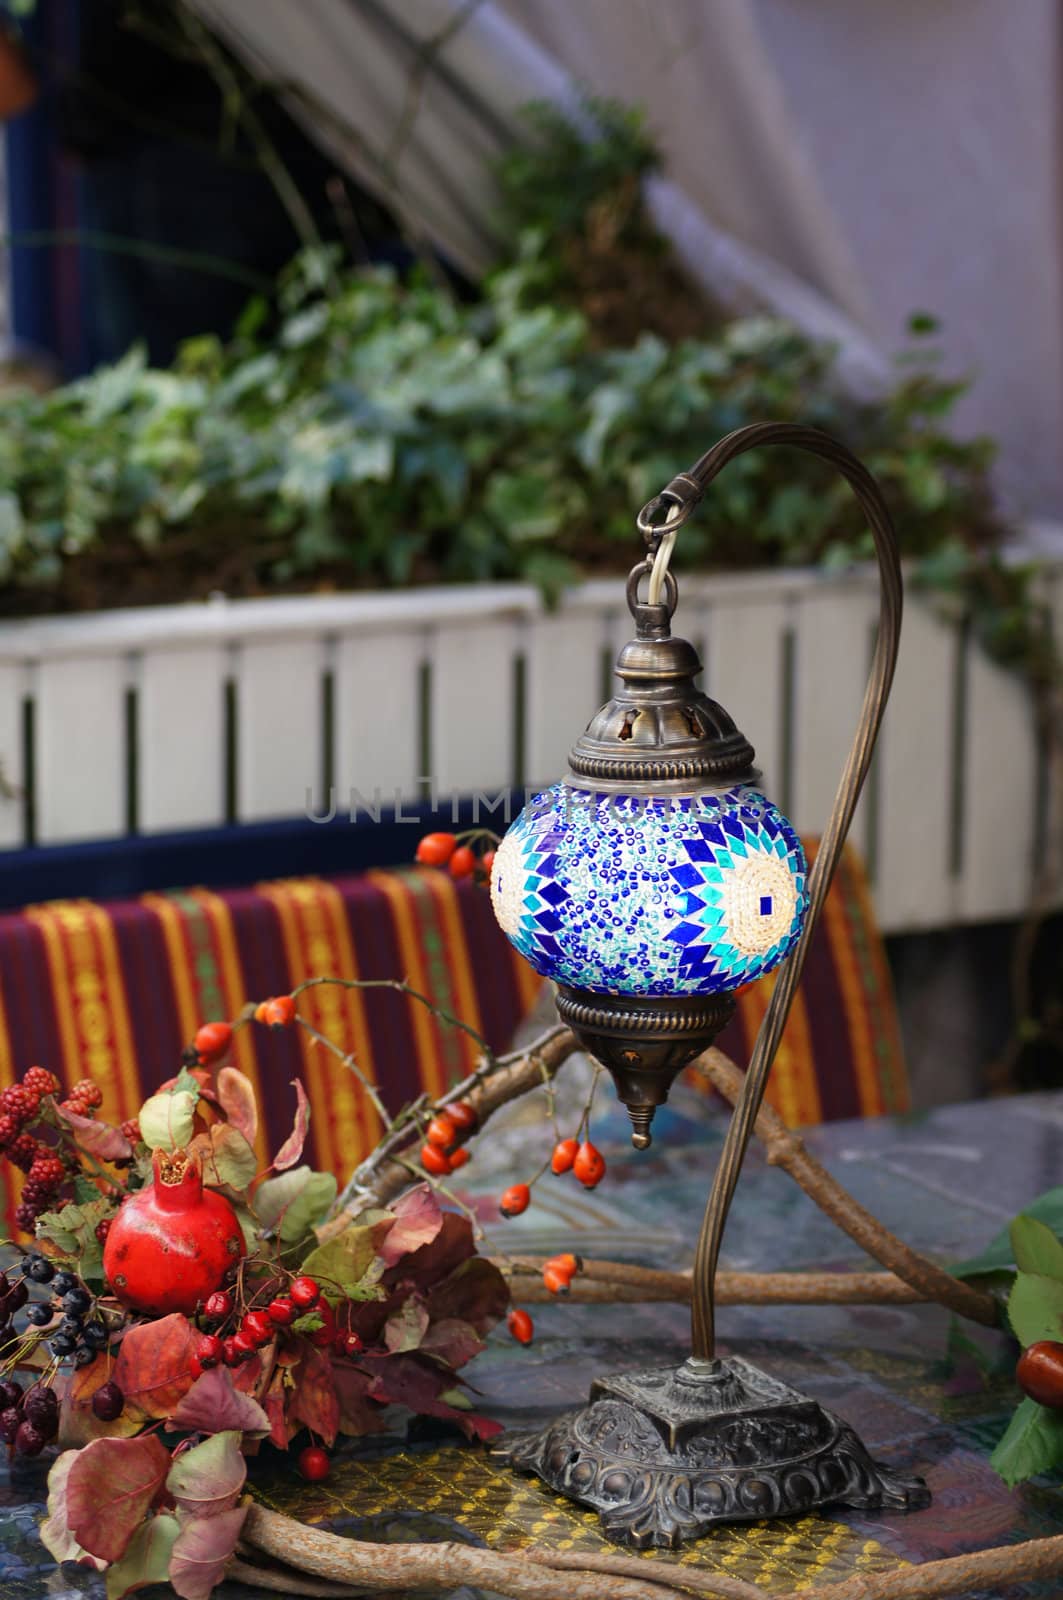 Closeup of mosaic lamp in arabic style with autumn fruits and vegetables